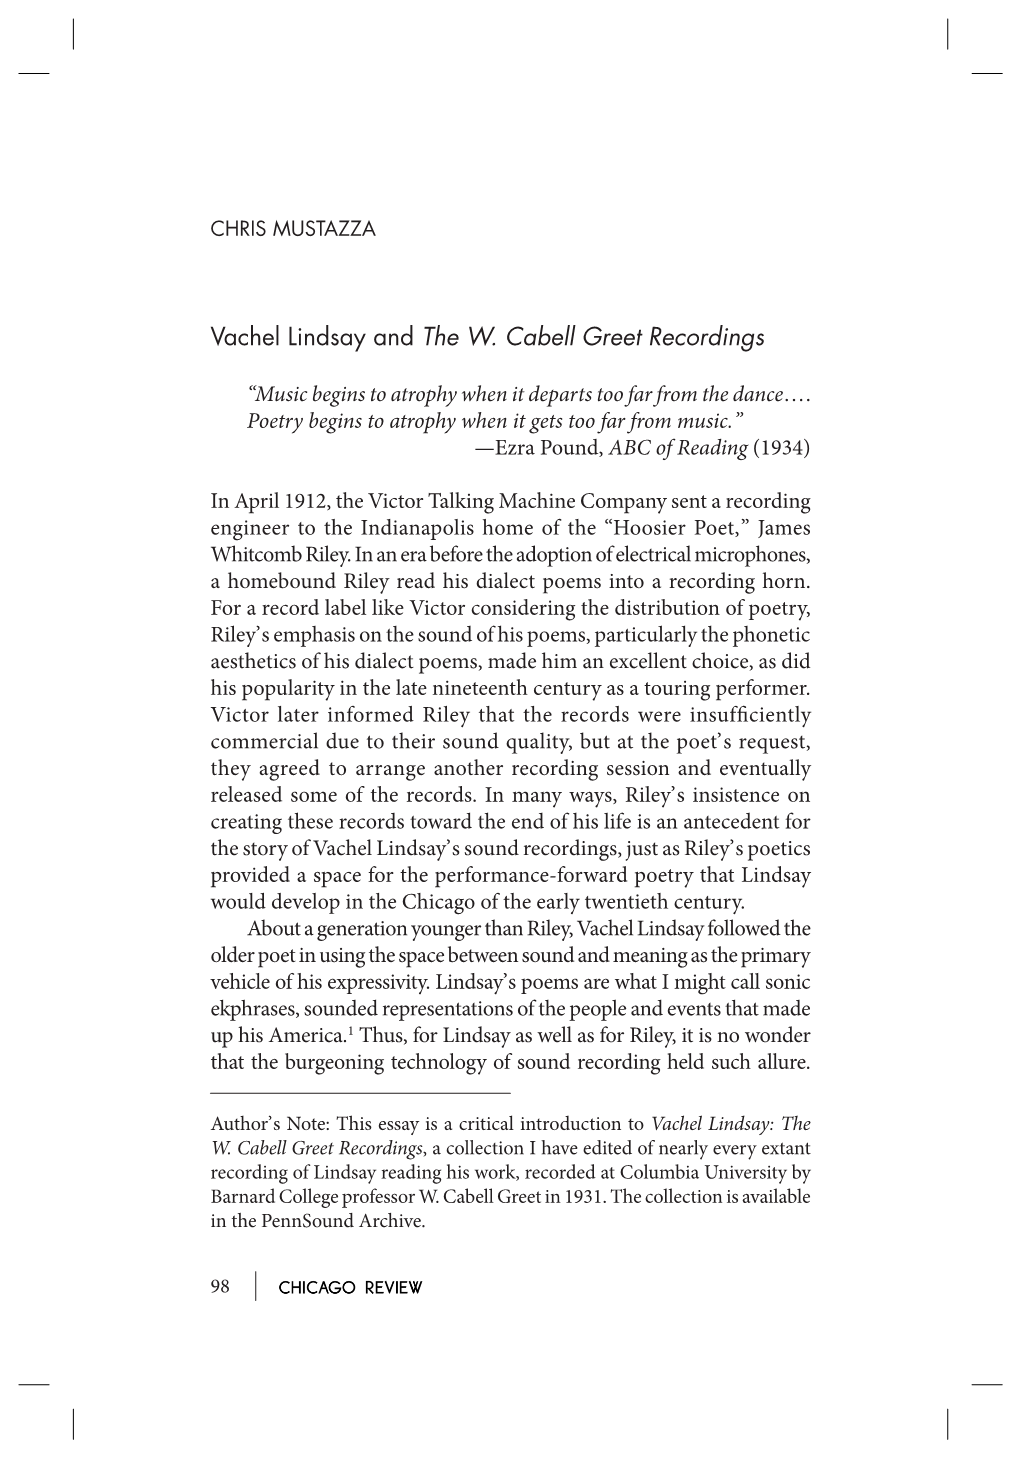 Vachel Lindsay and the W. Cabell Greet Recordings